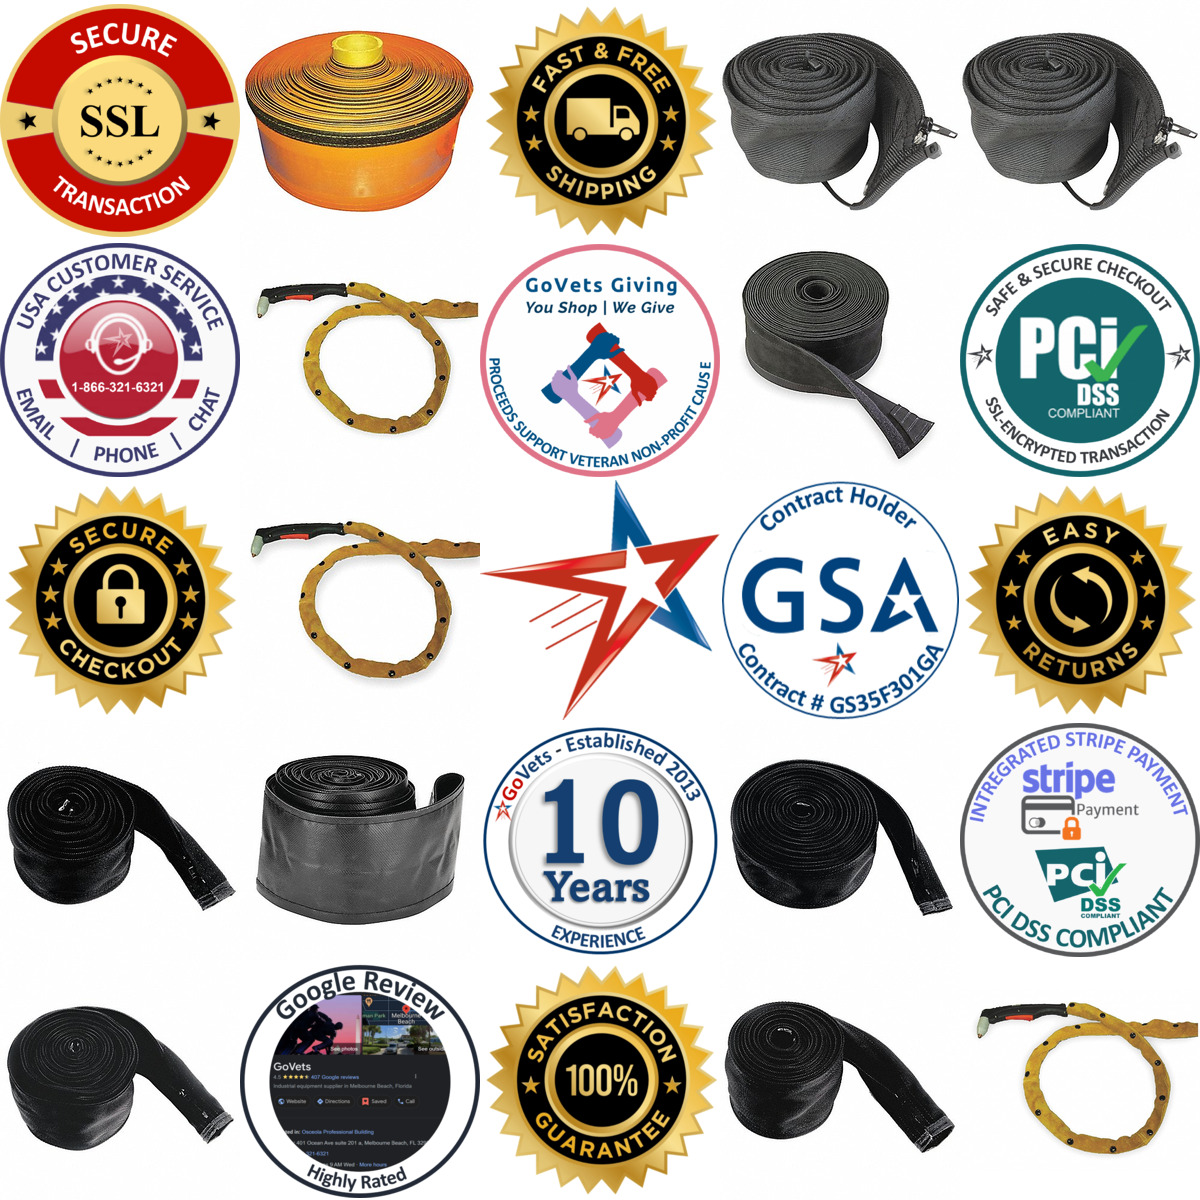 A selection of Welding Cable Covers products on GoVets